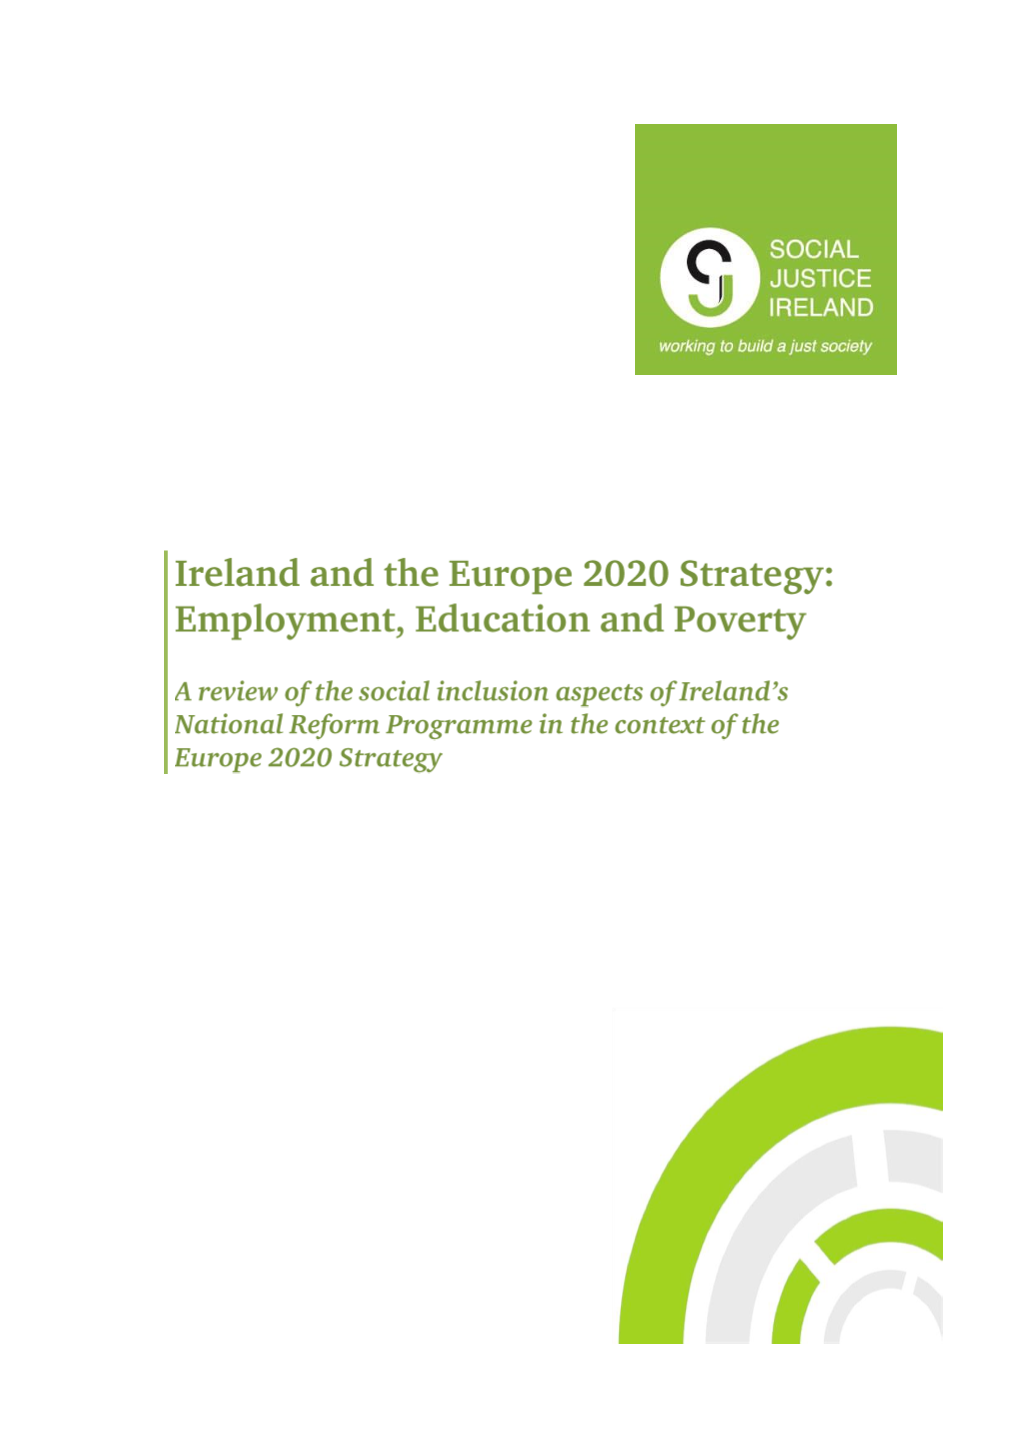 Ireland and the Europe 2020 Strategy